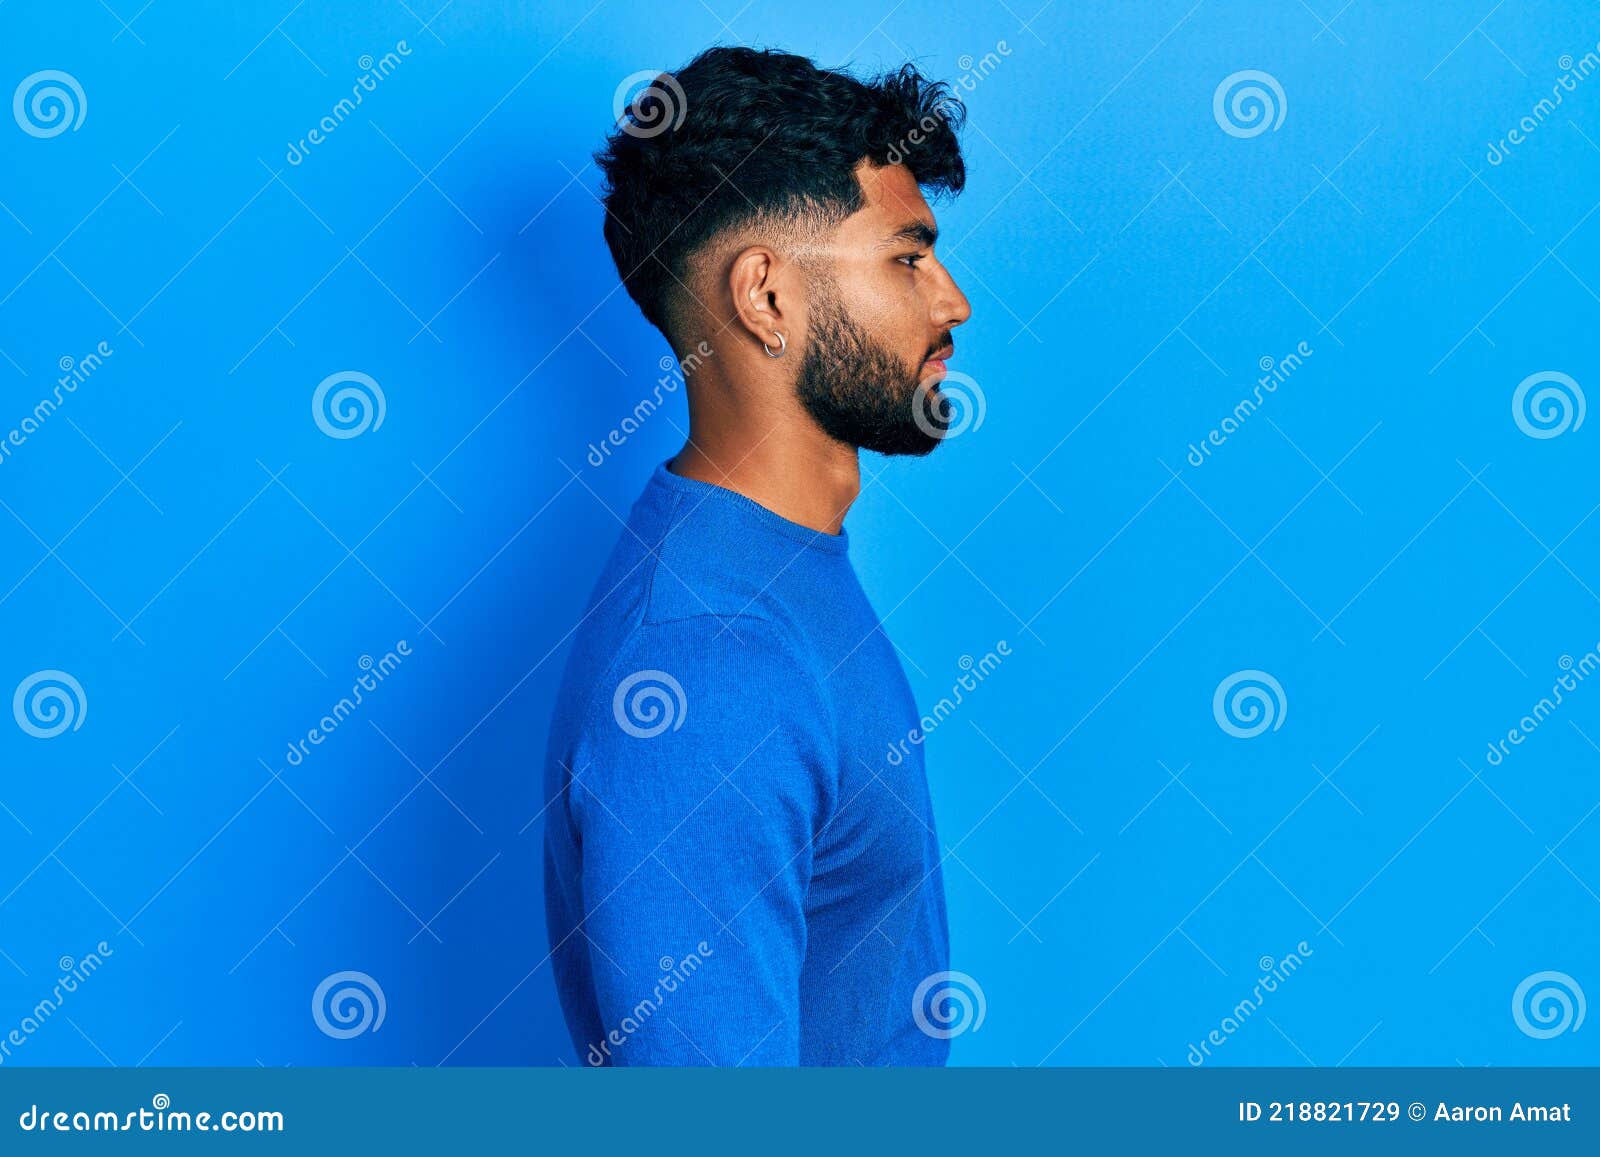 Arab Man with Beard Wearing Casual Blue Sweater Looking To Side, Relax ...